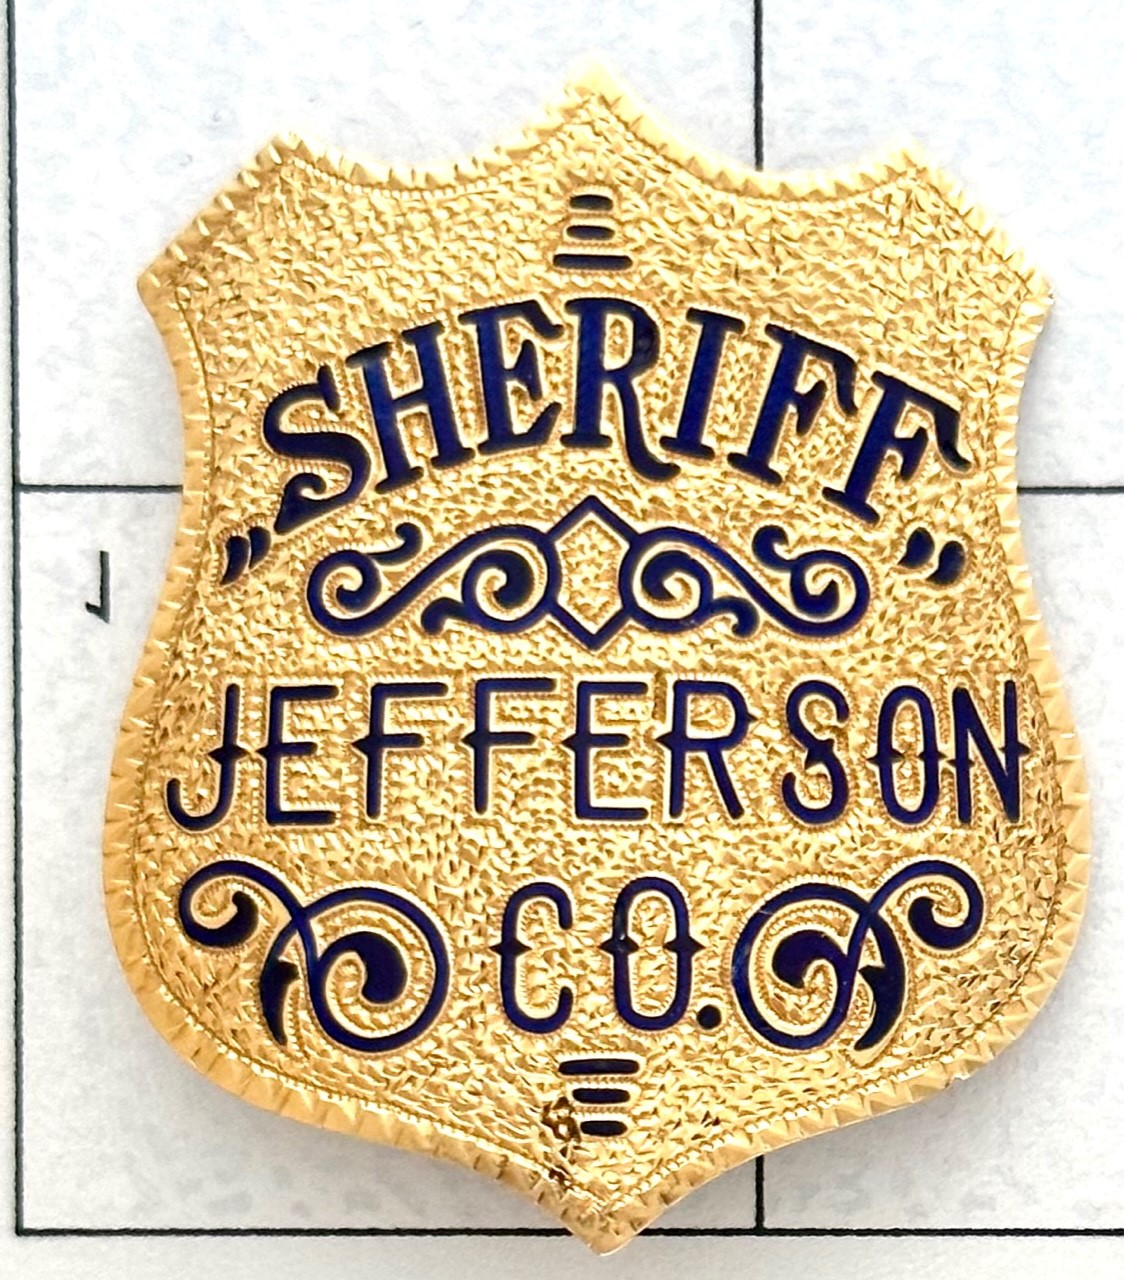 Jefferson Co. MO Sheriff 14k gold presentation badge:  Presented by His "Friends" William A. Crader Aug. 4, 1913.